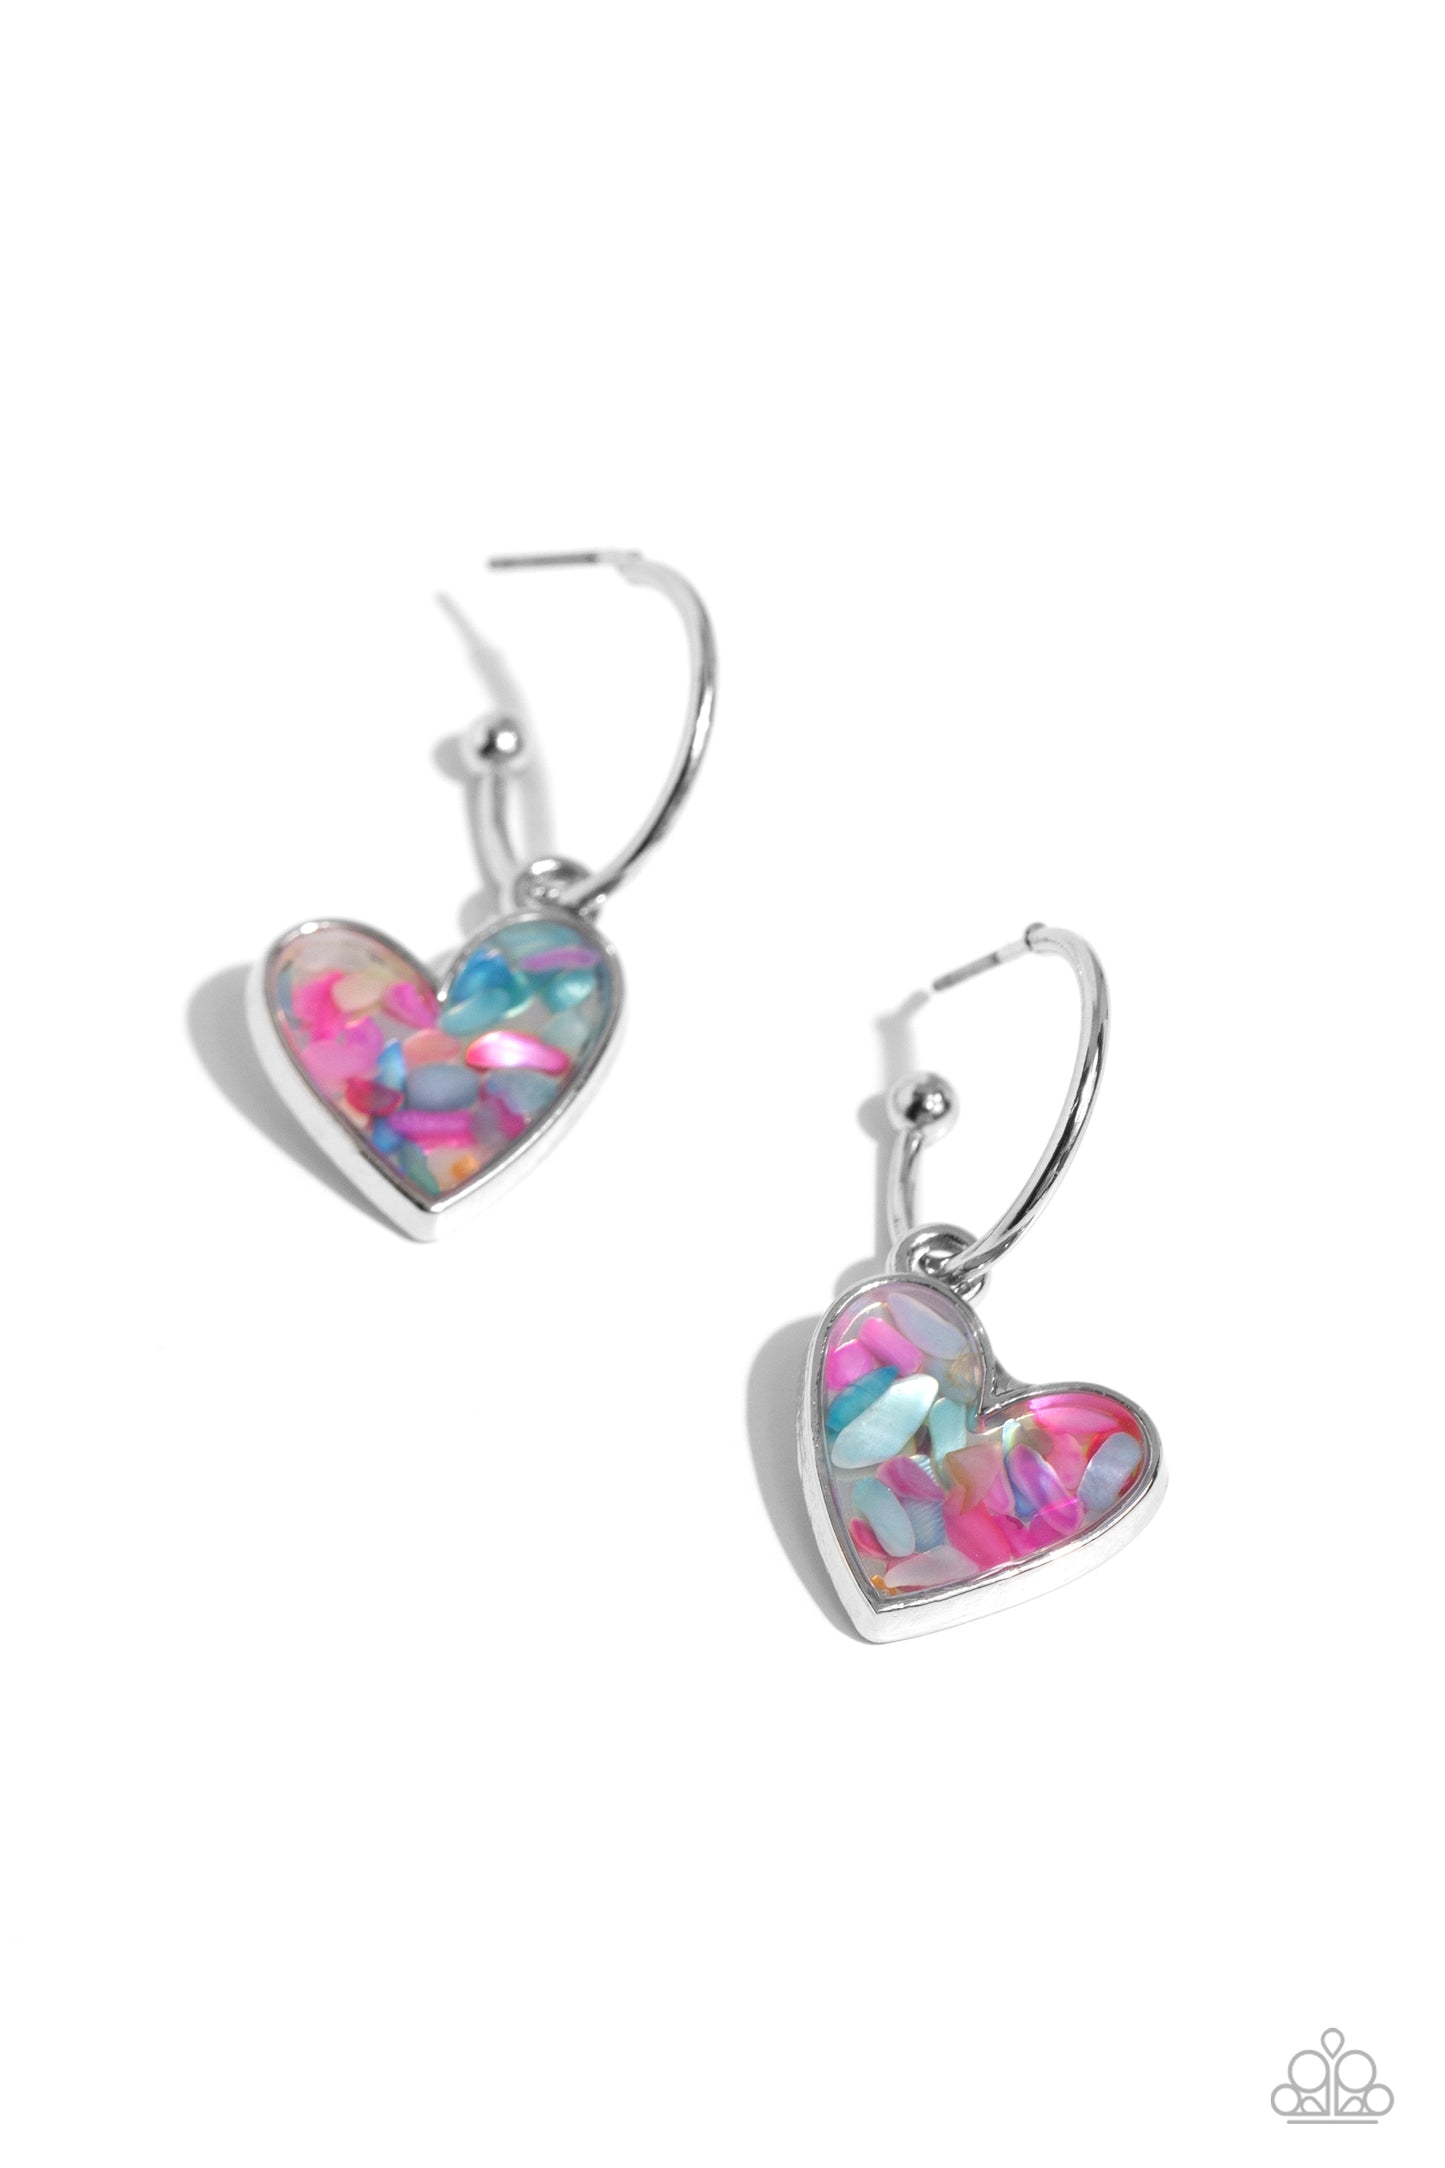 A small, skinny, silver hoop curves around the ear in a timeless fashion with a silver ball affixed to the end of the hoop, reminiscent of a barbell fitting. A silver heart frame, encased with haphazardly patterned pink and turquoise flecks of shell, collides into a kaleidoscope of color for a colorful, shimmery statement. Earring attaches to a standard post fitting. Hoop measures approximately 1/2" in diameter.  Sold as one pair of hoop earrings.